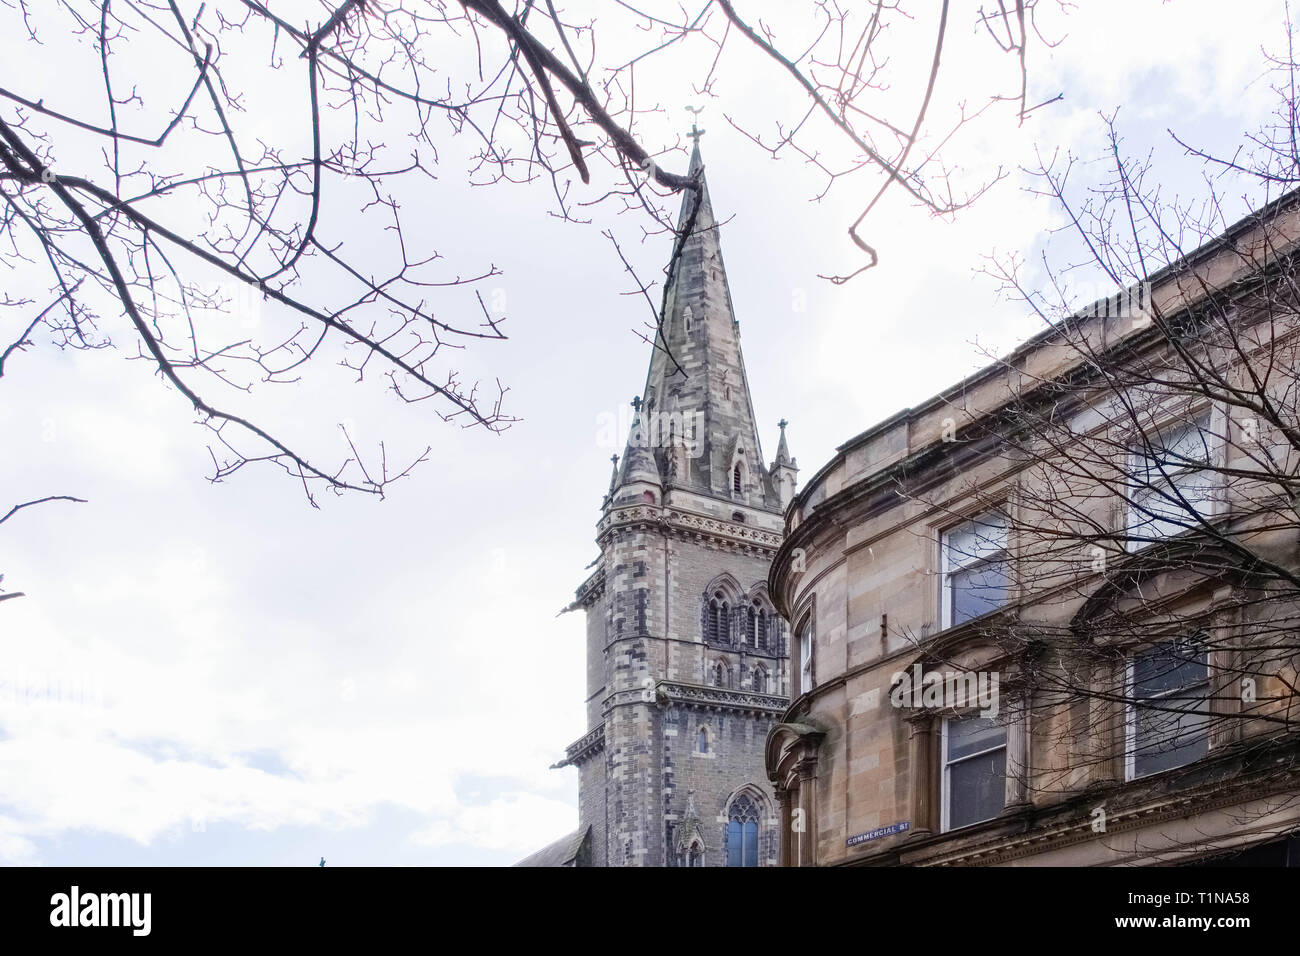 Dundee, Scotland, UK - March 23, 2019: St Paul's Cathedral Tower and rooftops in the city centre of Dundee in Scotland. Stock Photo